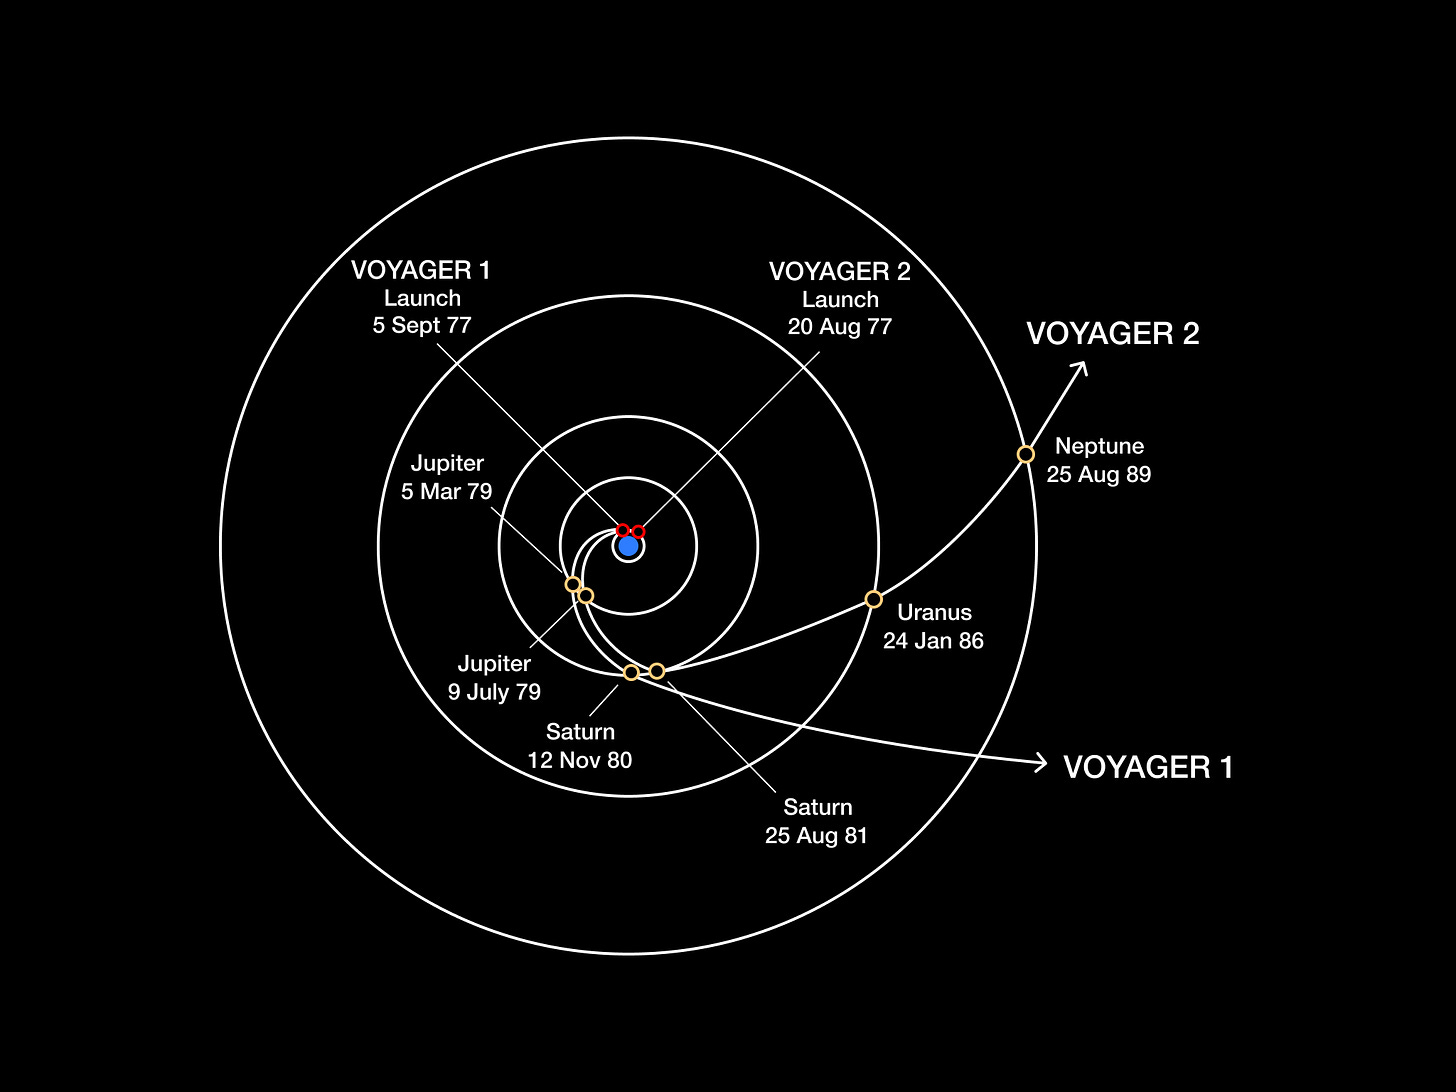 Gravity assist for Voyager 1 and 2